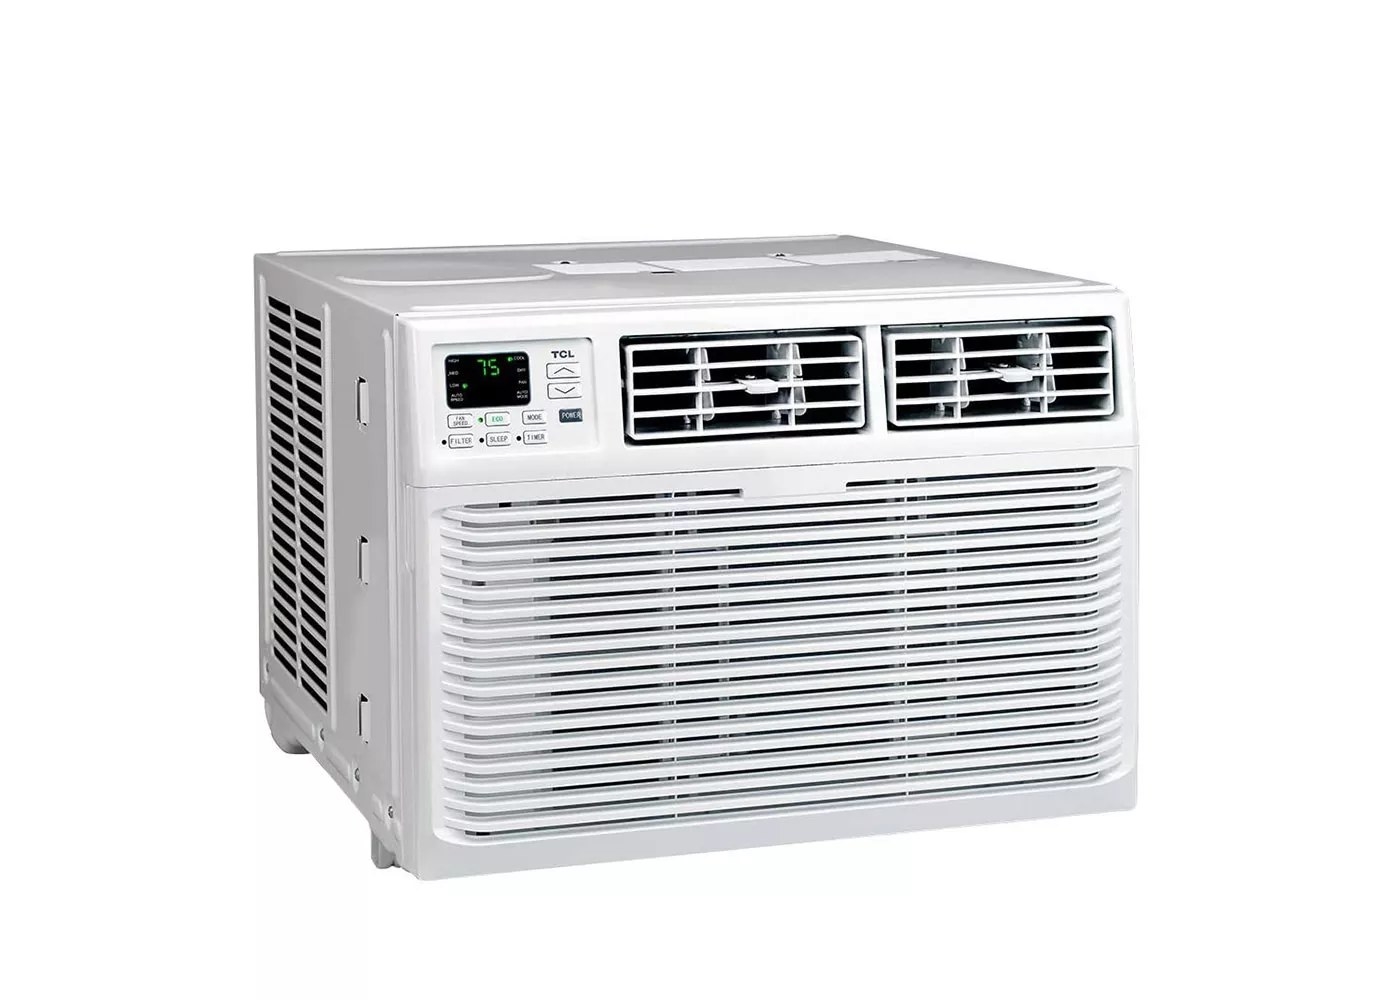 The air conditioner